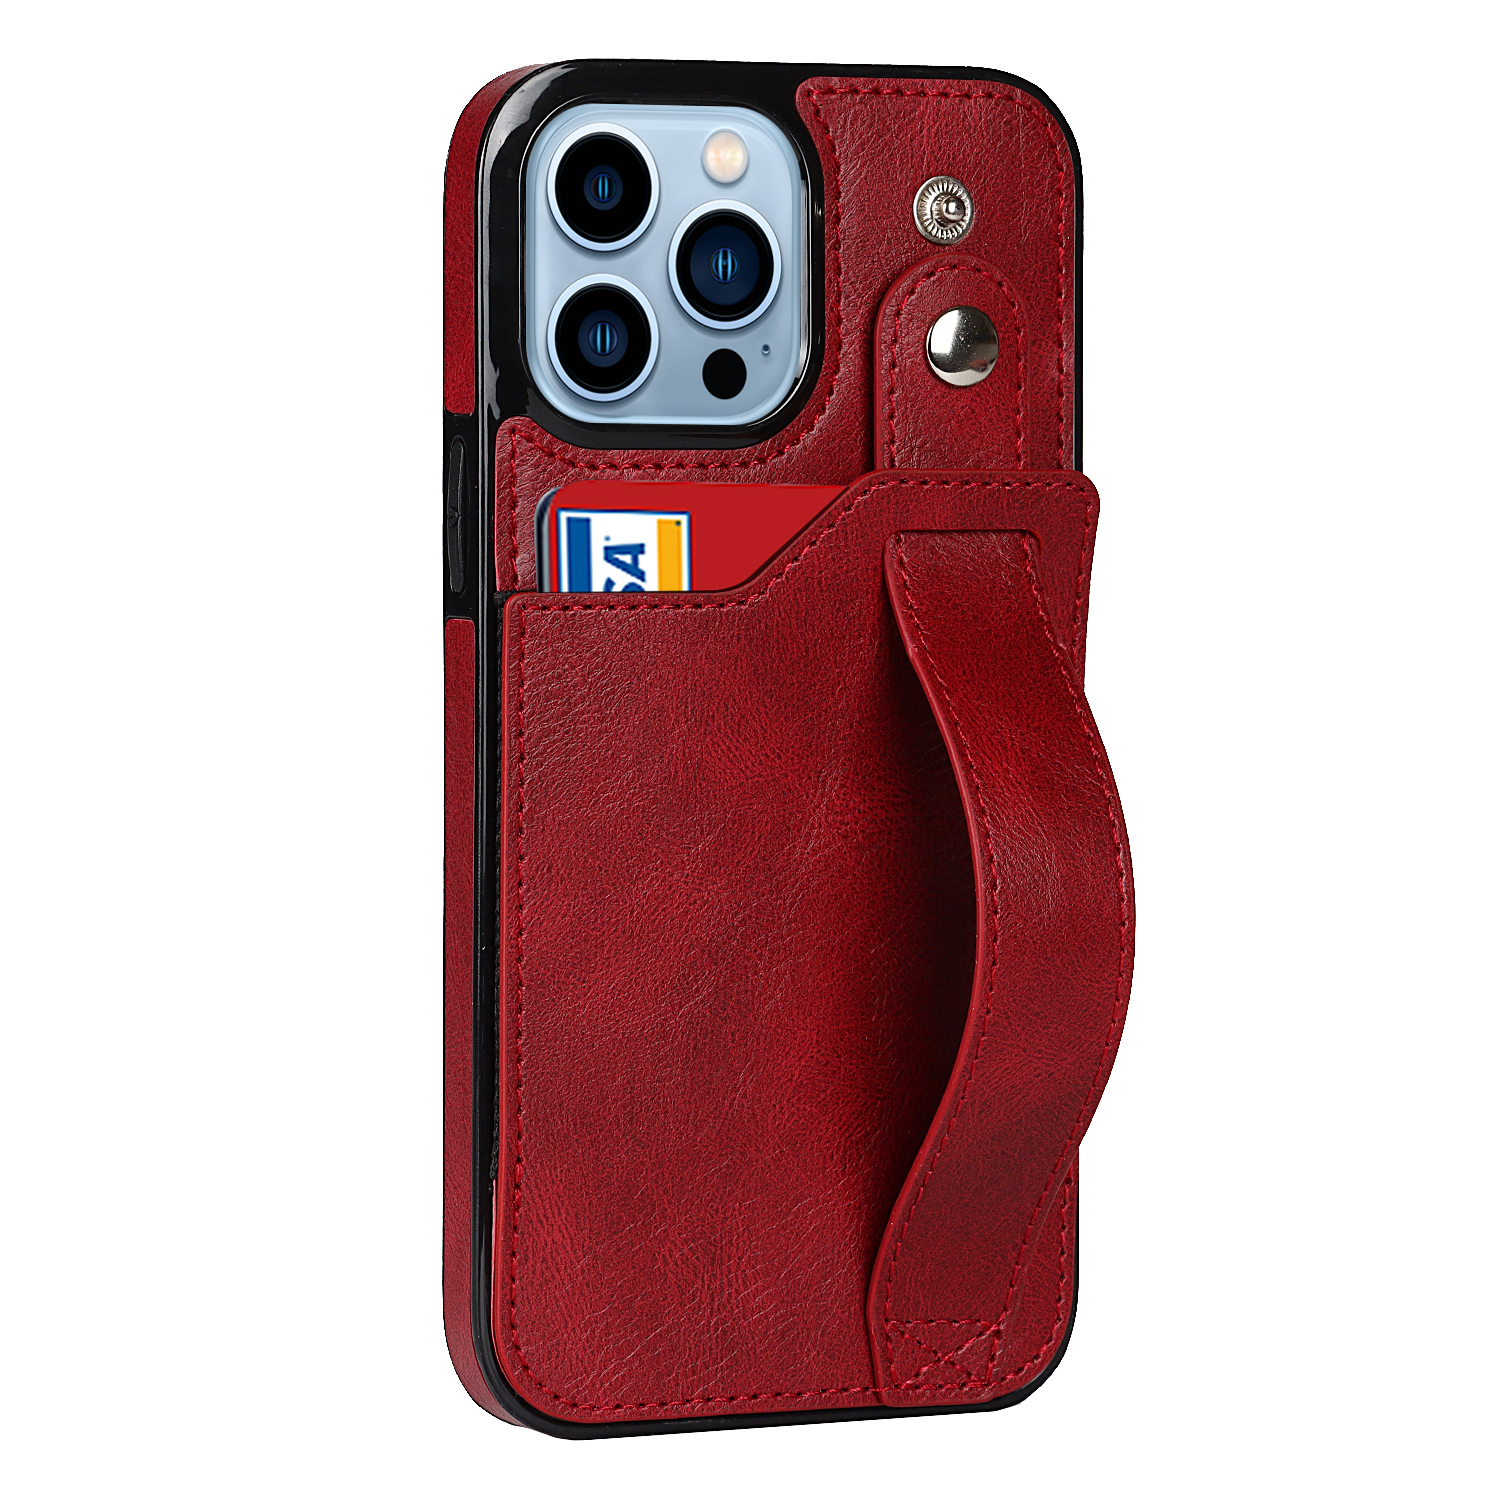 Samsung Galaxy S22 Ultra Back Cover Hoesje met Handvat - leer- Handvat - Backcover - Samsung Galaxy S22 Ultra - Rood